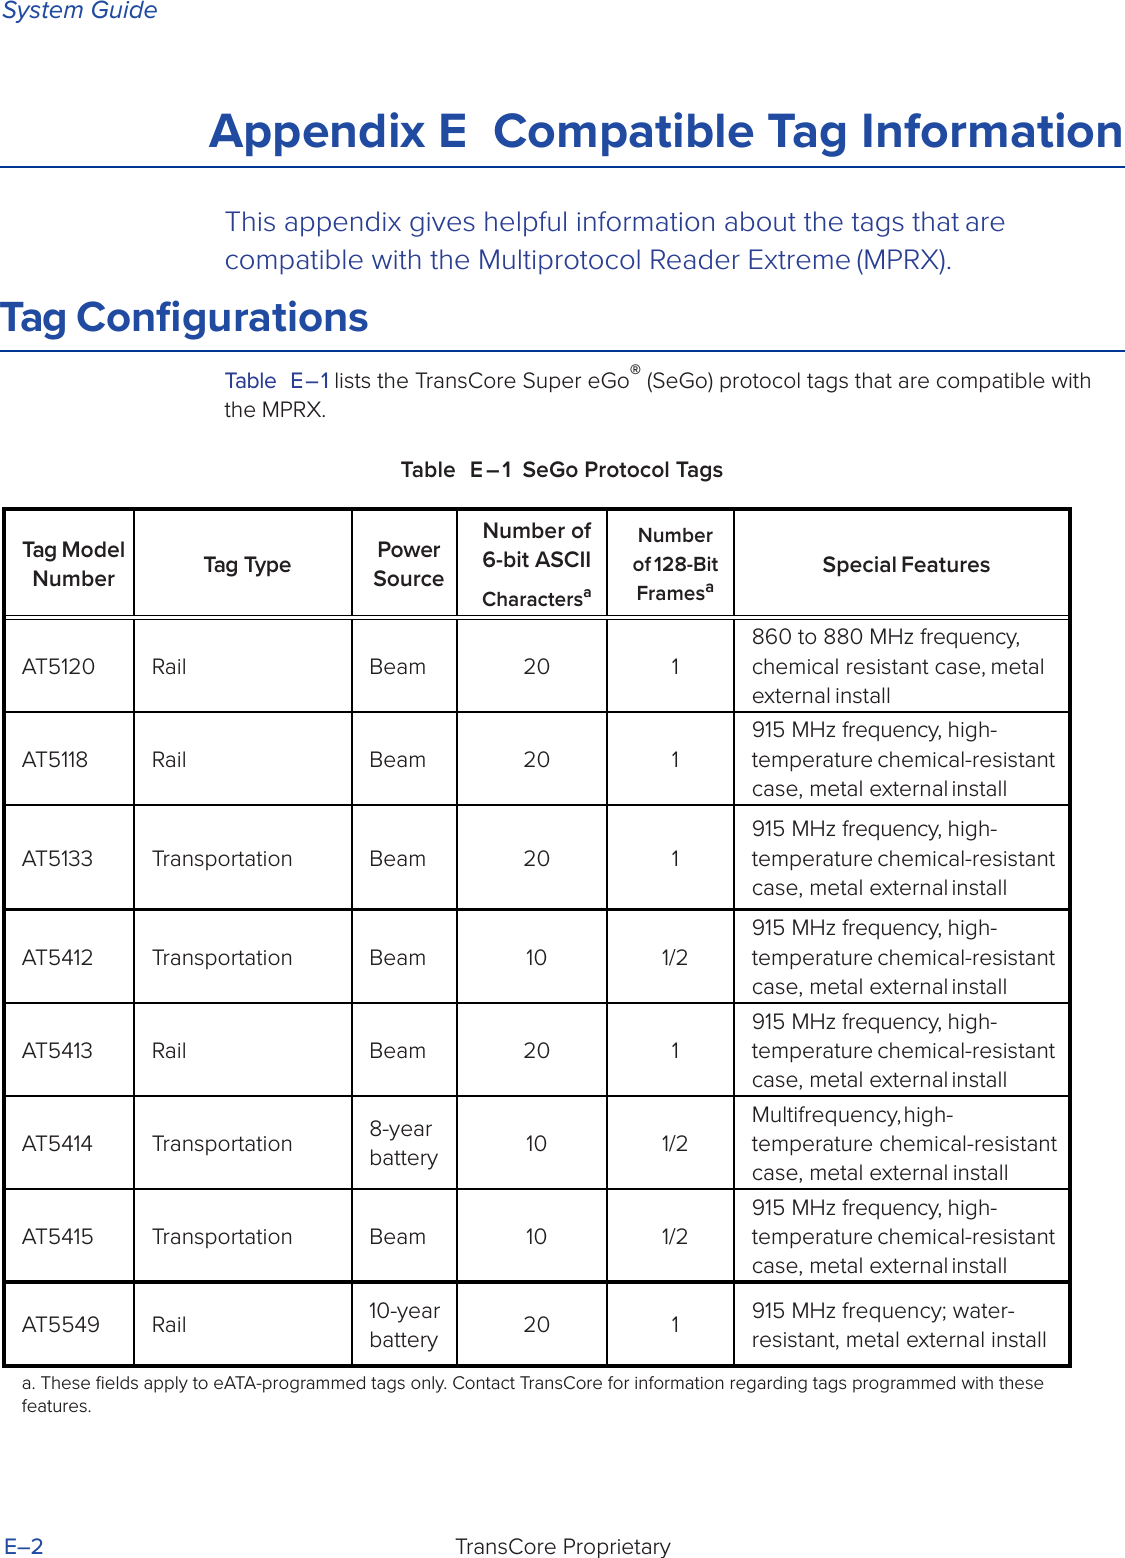 System GuideTransCore ProprietaryE–2Appendix E  Compatible Tag InformationThis appendix gives helpful information about the tags that are compatible with the Multiprotocol Reader Extreme (MPRX).Tag Conﬁgurations Table E – 1 lists the TransCore Super eGo® (SeGo) protocol tags that are compatible with the MPRX.Table E – 1 SeGo Protocol TagsTag Model Number Tag Type Power SourceNumber of 6-bit ASCIICharactersaNumber of 128-Bit FramesaSpecial FeaturesAT5120 Rail Beam 20 1860 to 880 MHz frequency, chemical resistant case, metal external installAT5118 Rail Beam 20 1915 MHz frequency, high- temperature chemical-resistant case, metal external installAT5133 Transportation Beam 20 1915 MHz frequency, high- temperature chemical-resistant case, metal external installAT5412 Transportation Beam 10 1/2915 MHz frequency, high- temperature chemical-resistant case, metal external installAT5413 Rail Beam 20 1915 MHz frequency, high- temperature chemical-resistant case, metal external installAT5414 Transportation 8-year battery 10 1/2Multifrequency, high-temperature chemical-resistant case, metal external installAT5415 Transportation Beam 10 1/2915 MHz frequency, high- temperature chemical-resistant case, metal external installAT5549 Rail 10-year battery 20 1 915 MHz frequency; water- resistant, metal external installa. These ﬁelds apply to eATA-programmed tags only. Contact TransCore for information regarding tags programmed with these features.